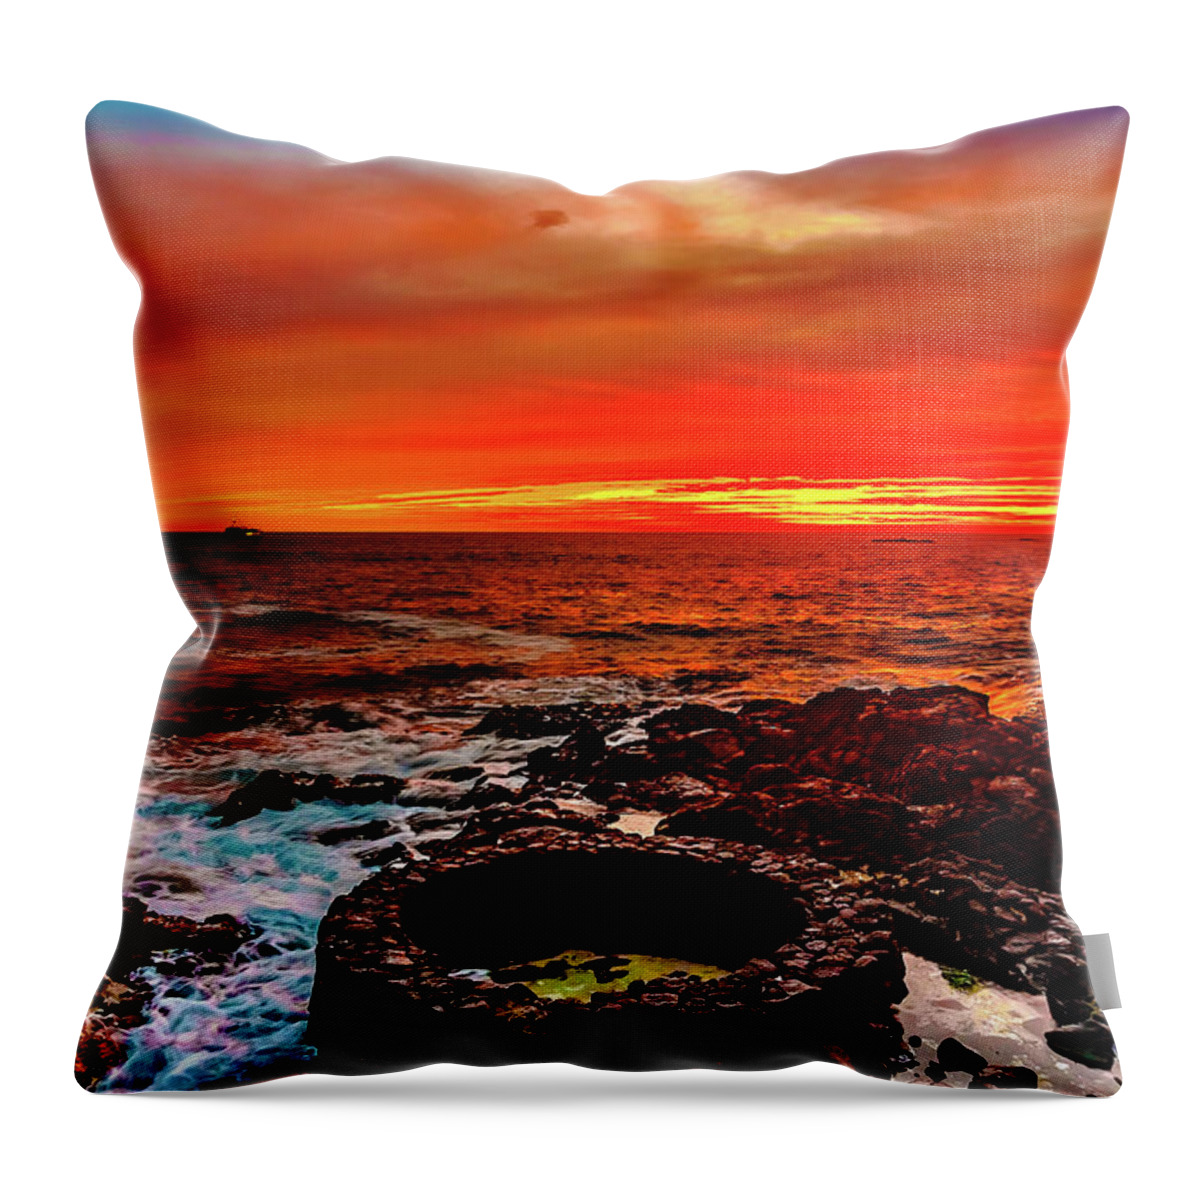  Throw Pillow featuring the photograph Lava Bath after Sunset by John Bauer